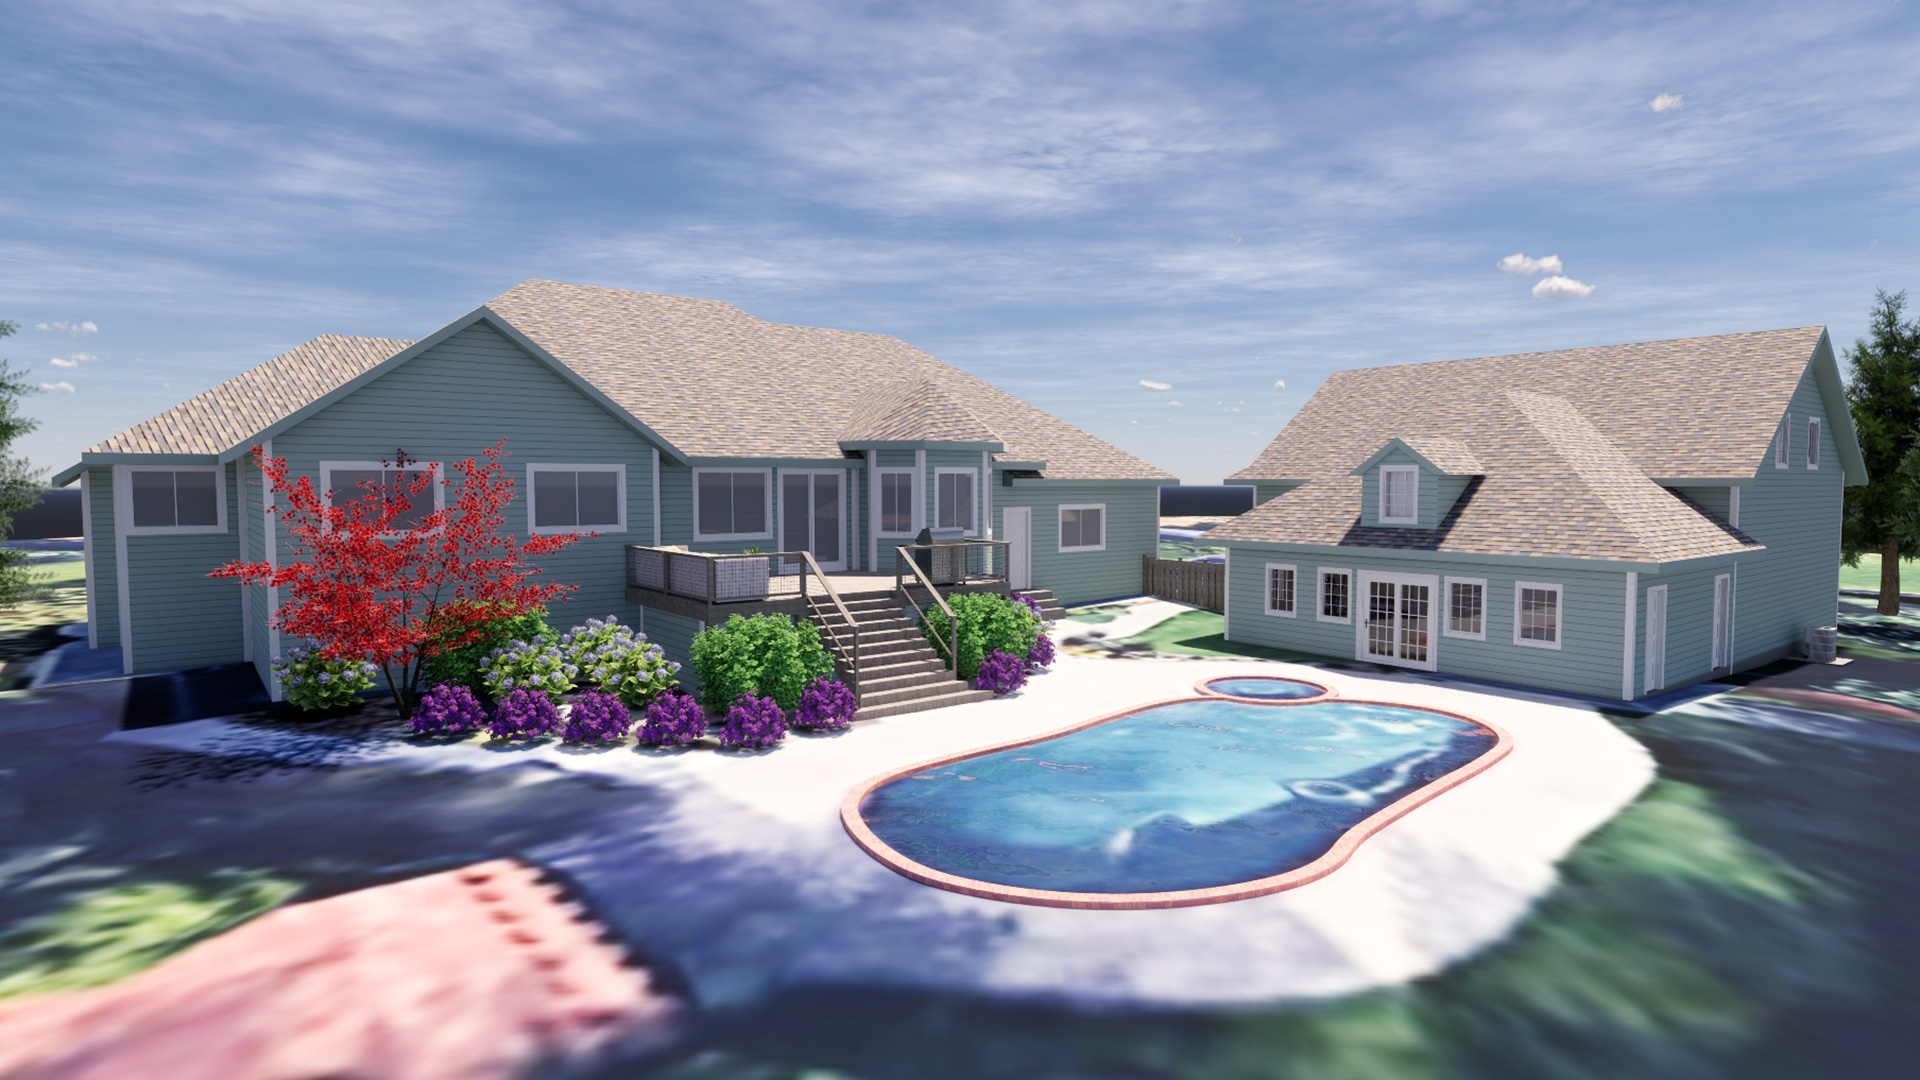 Render of a residential project, with a pool, desk, and garage.